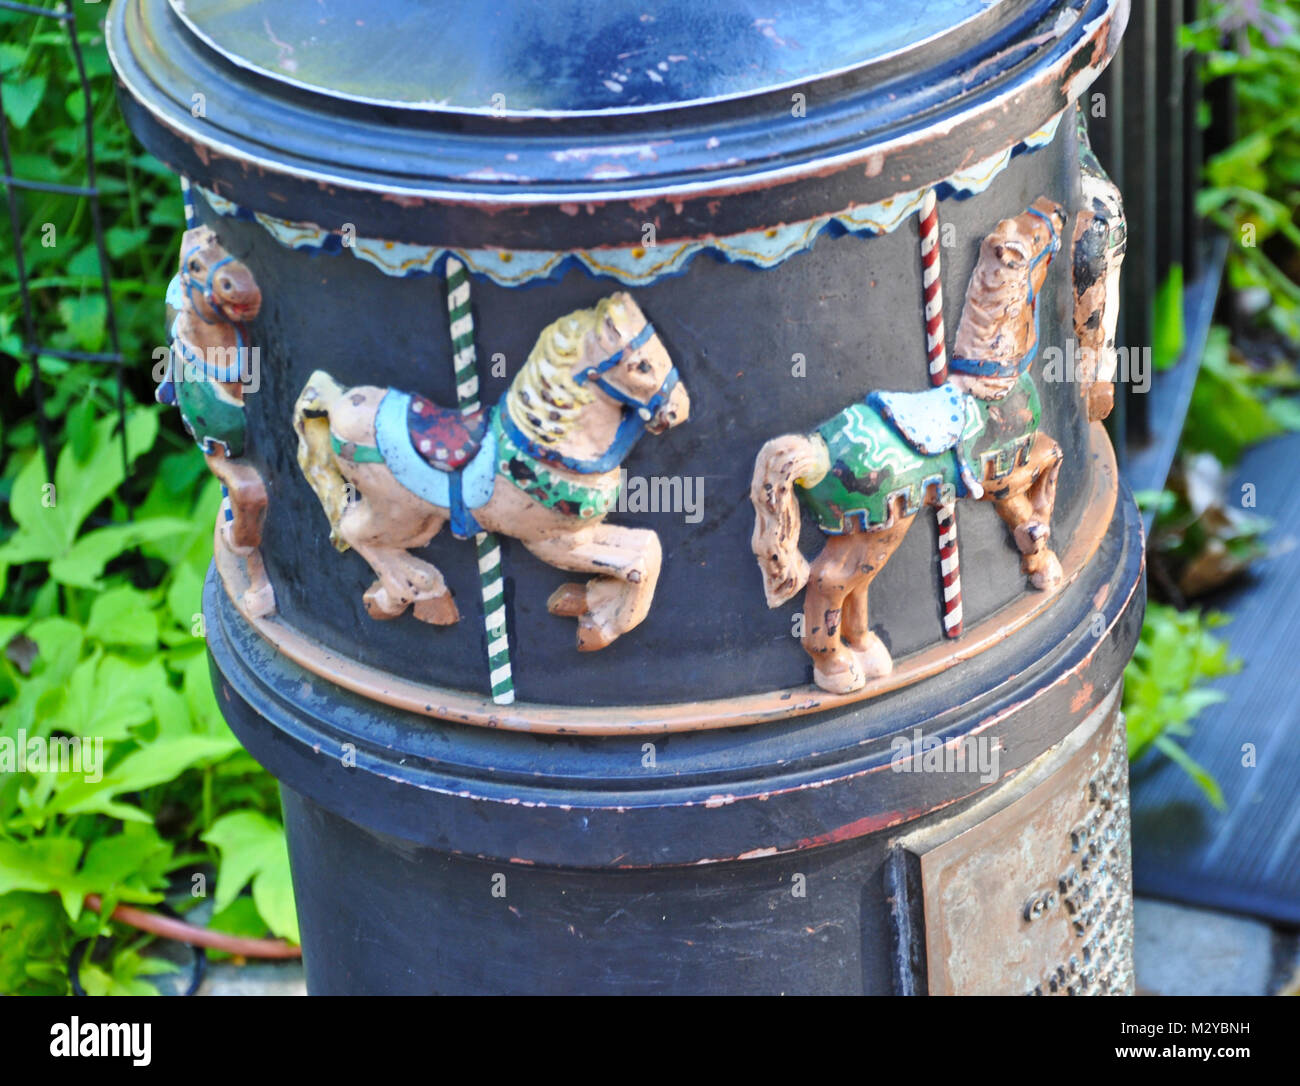 New York, NY. Central Park Carousel. August 22, 2016. @ Veronica Bruno / Alamy Stock Photo